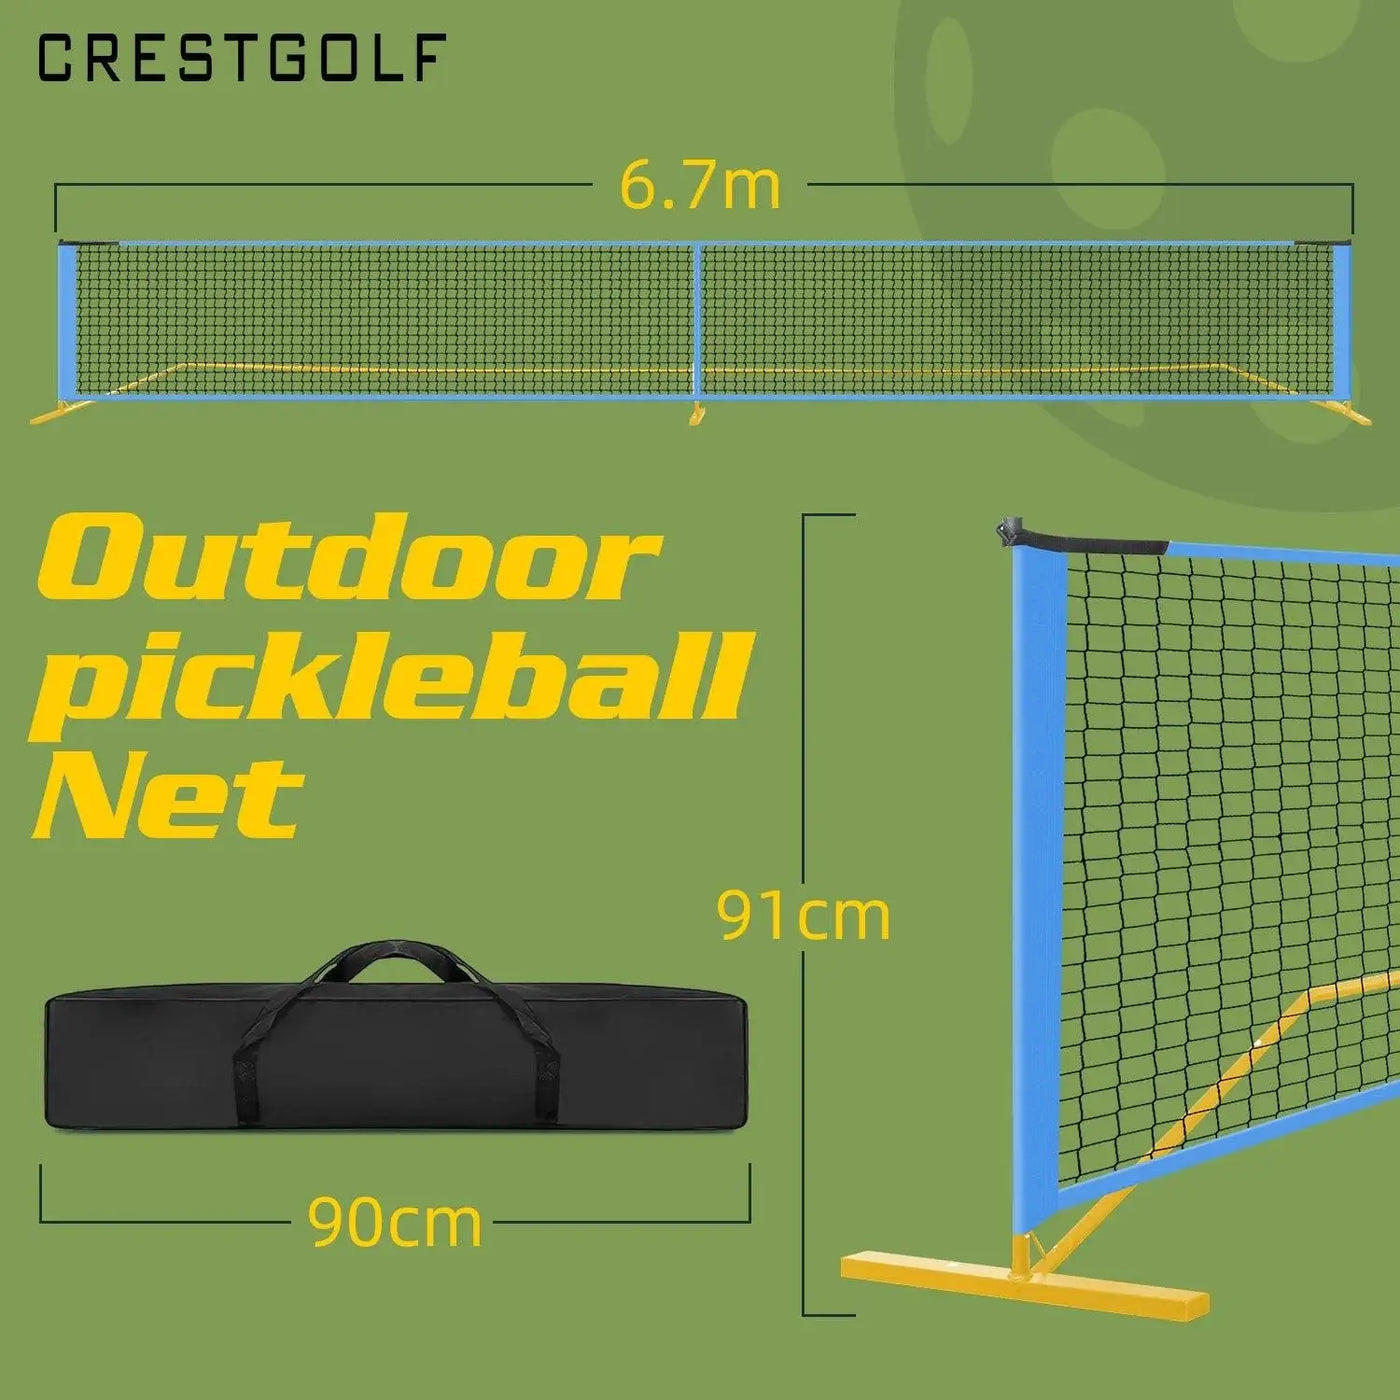 Reliable net for indoor pickleball matches